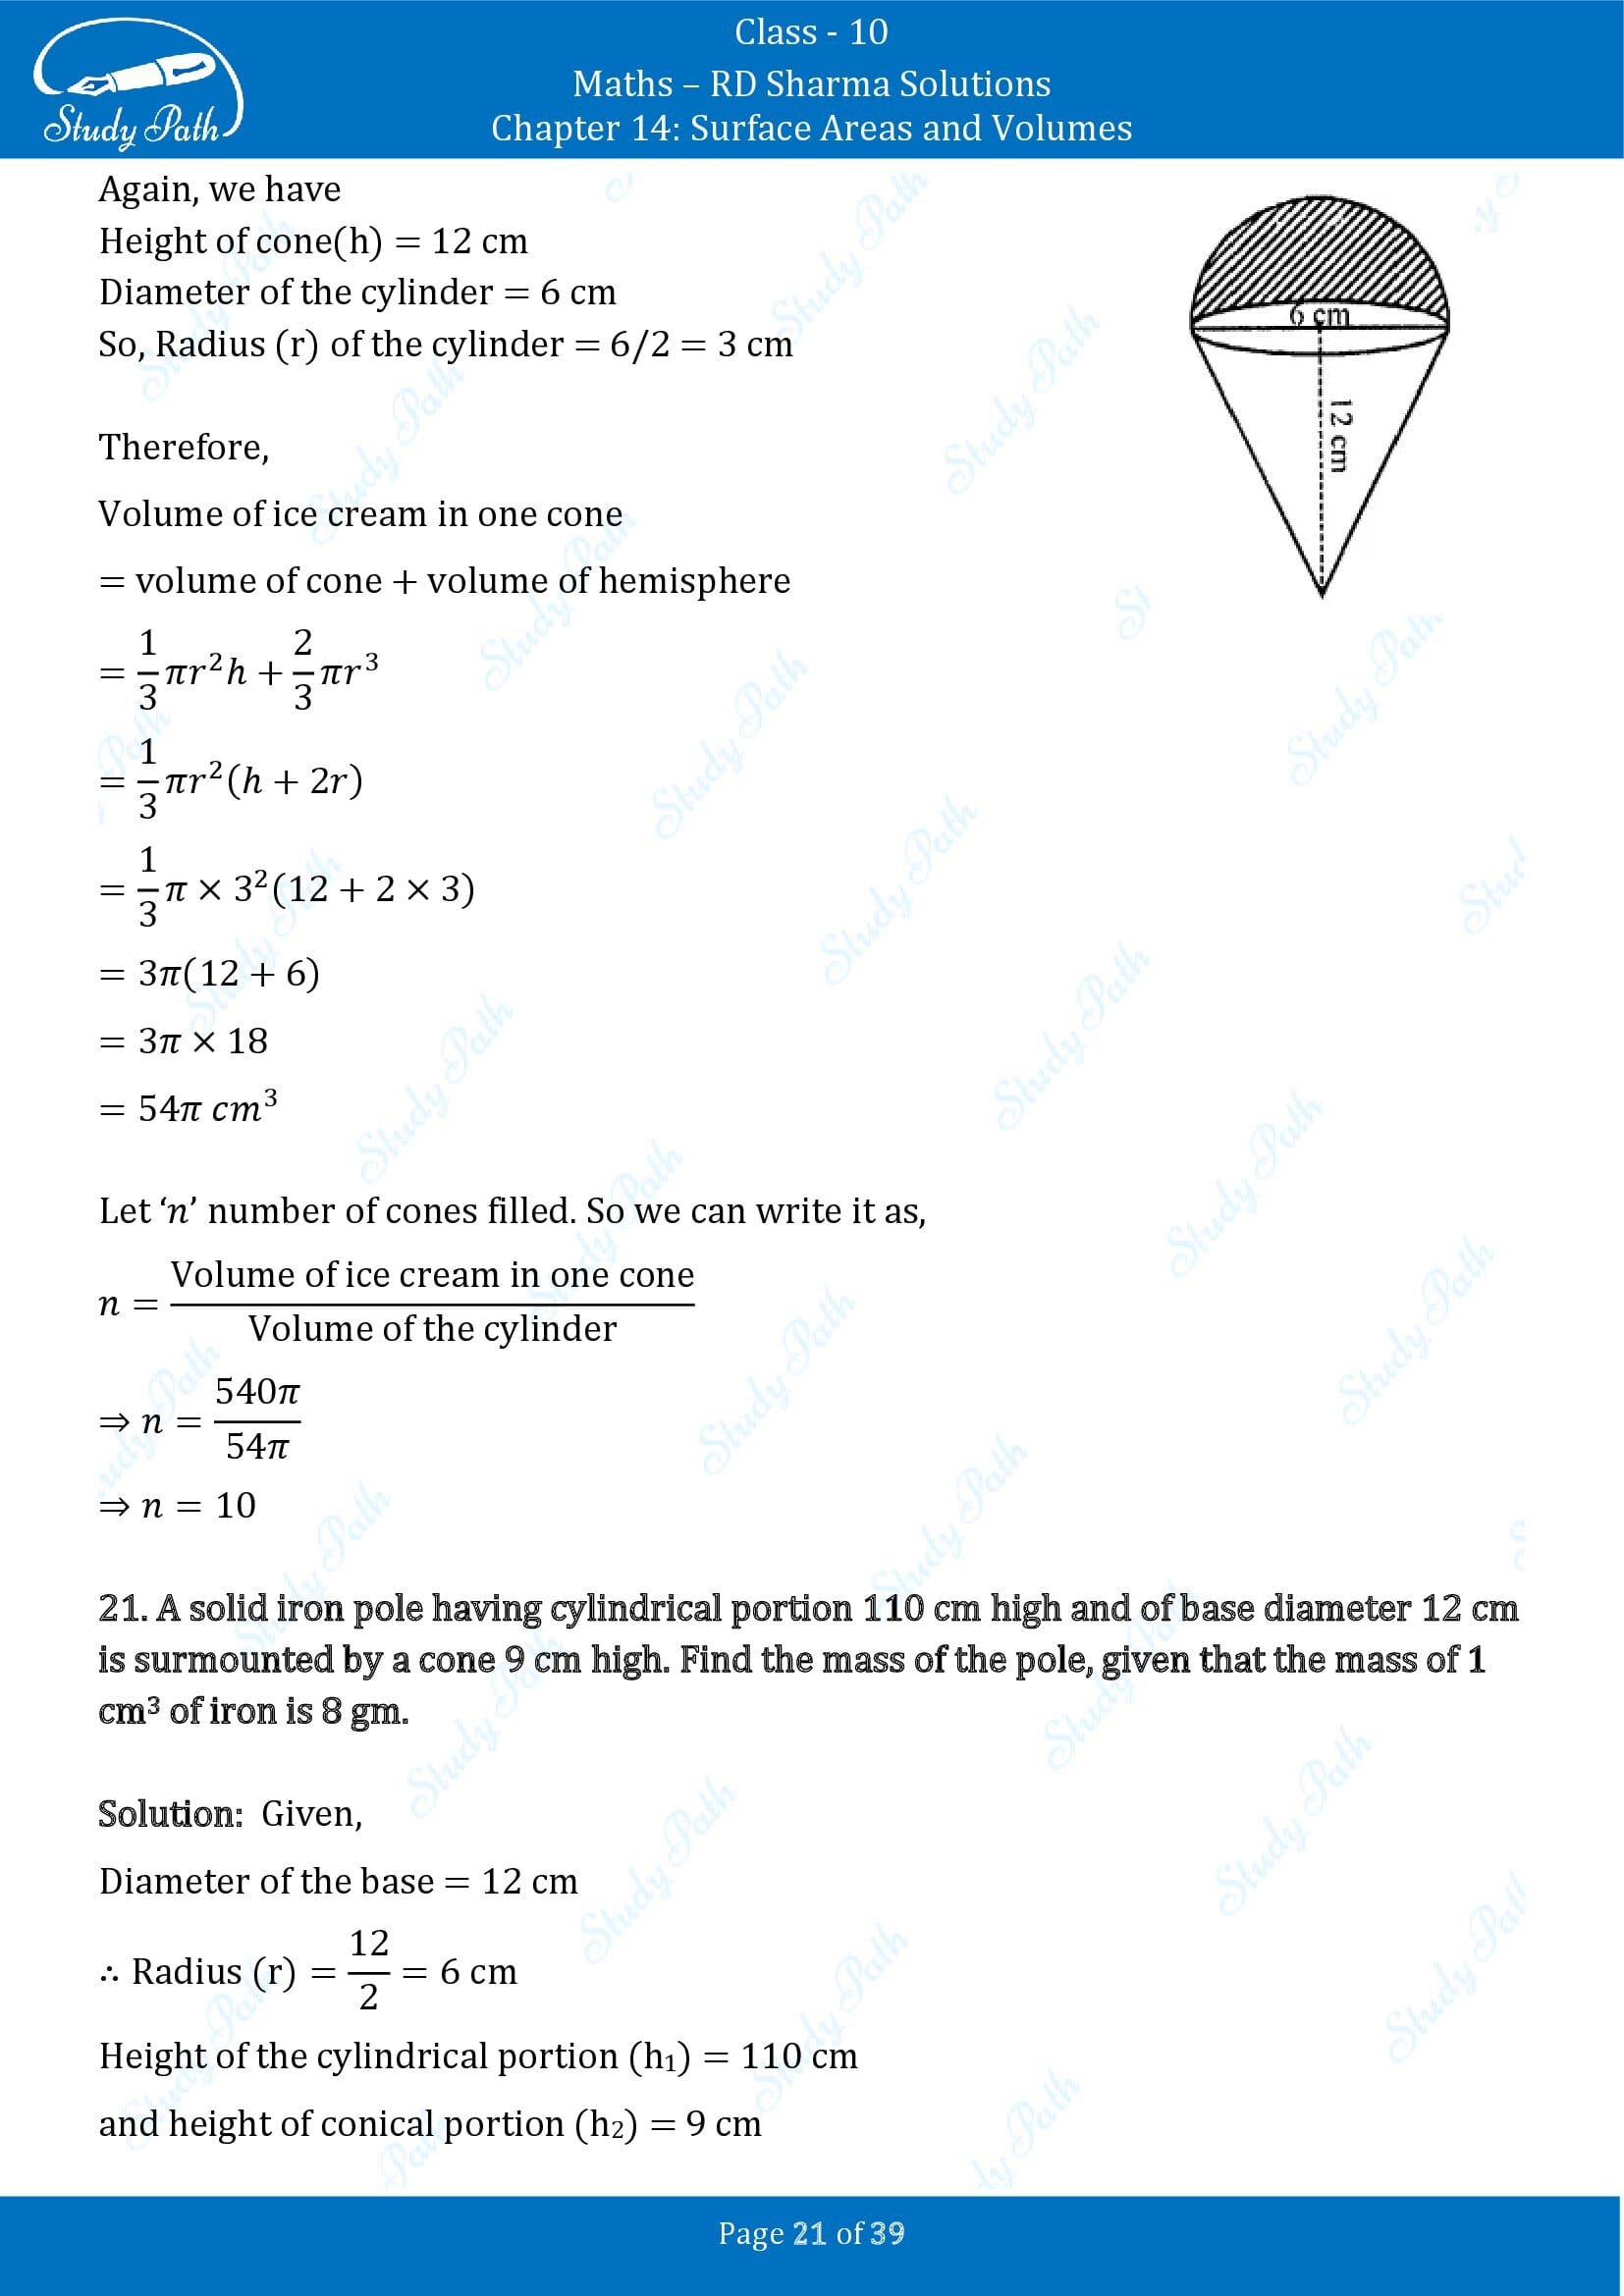 RD Sharma Solutions Class 10 Chapter 14 Surface Areas and Volumes Exercise 14.2 00021